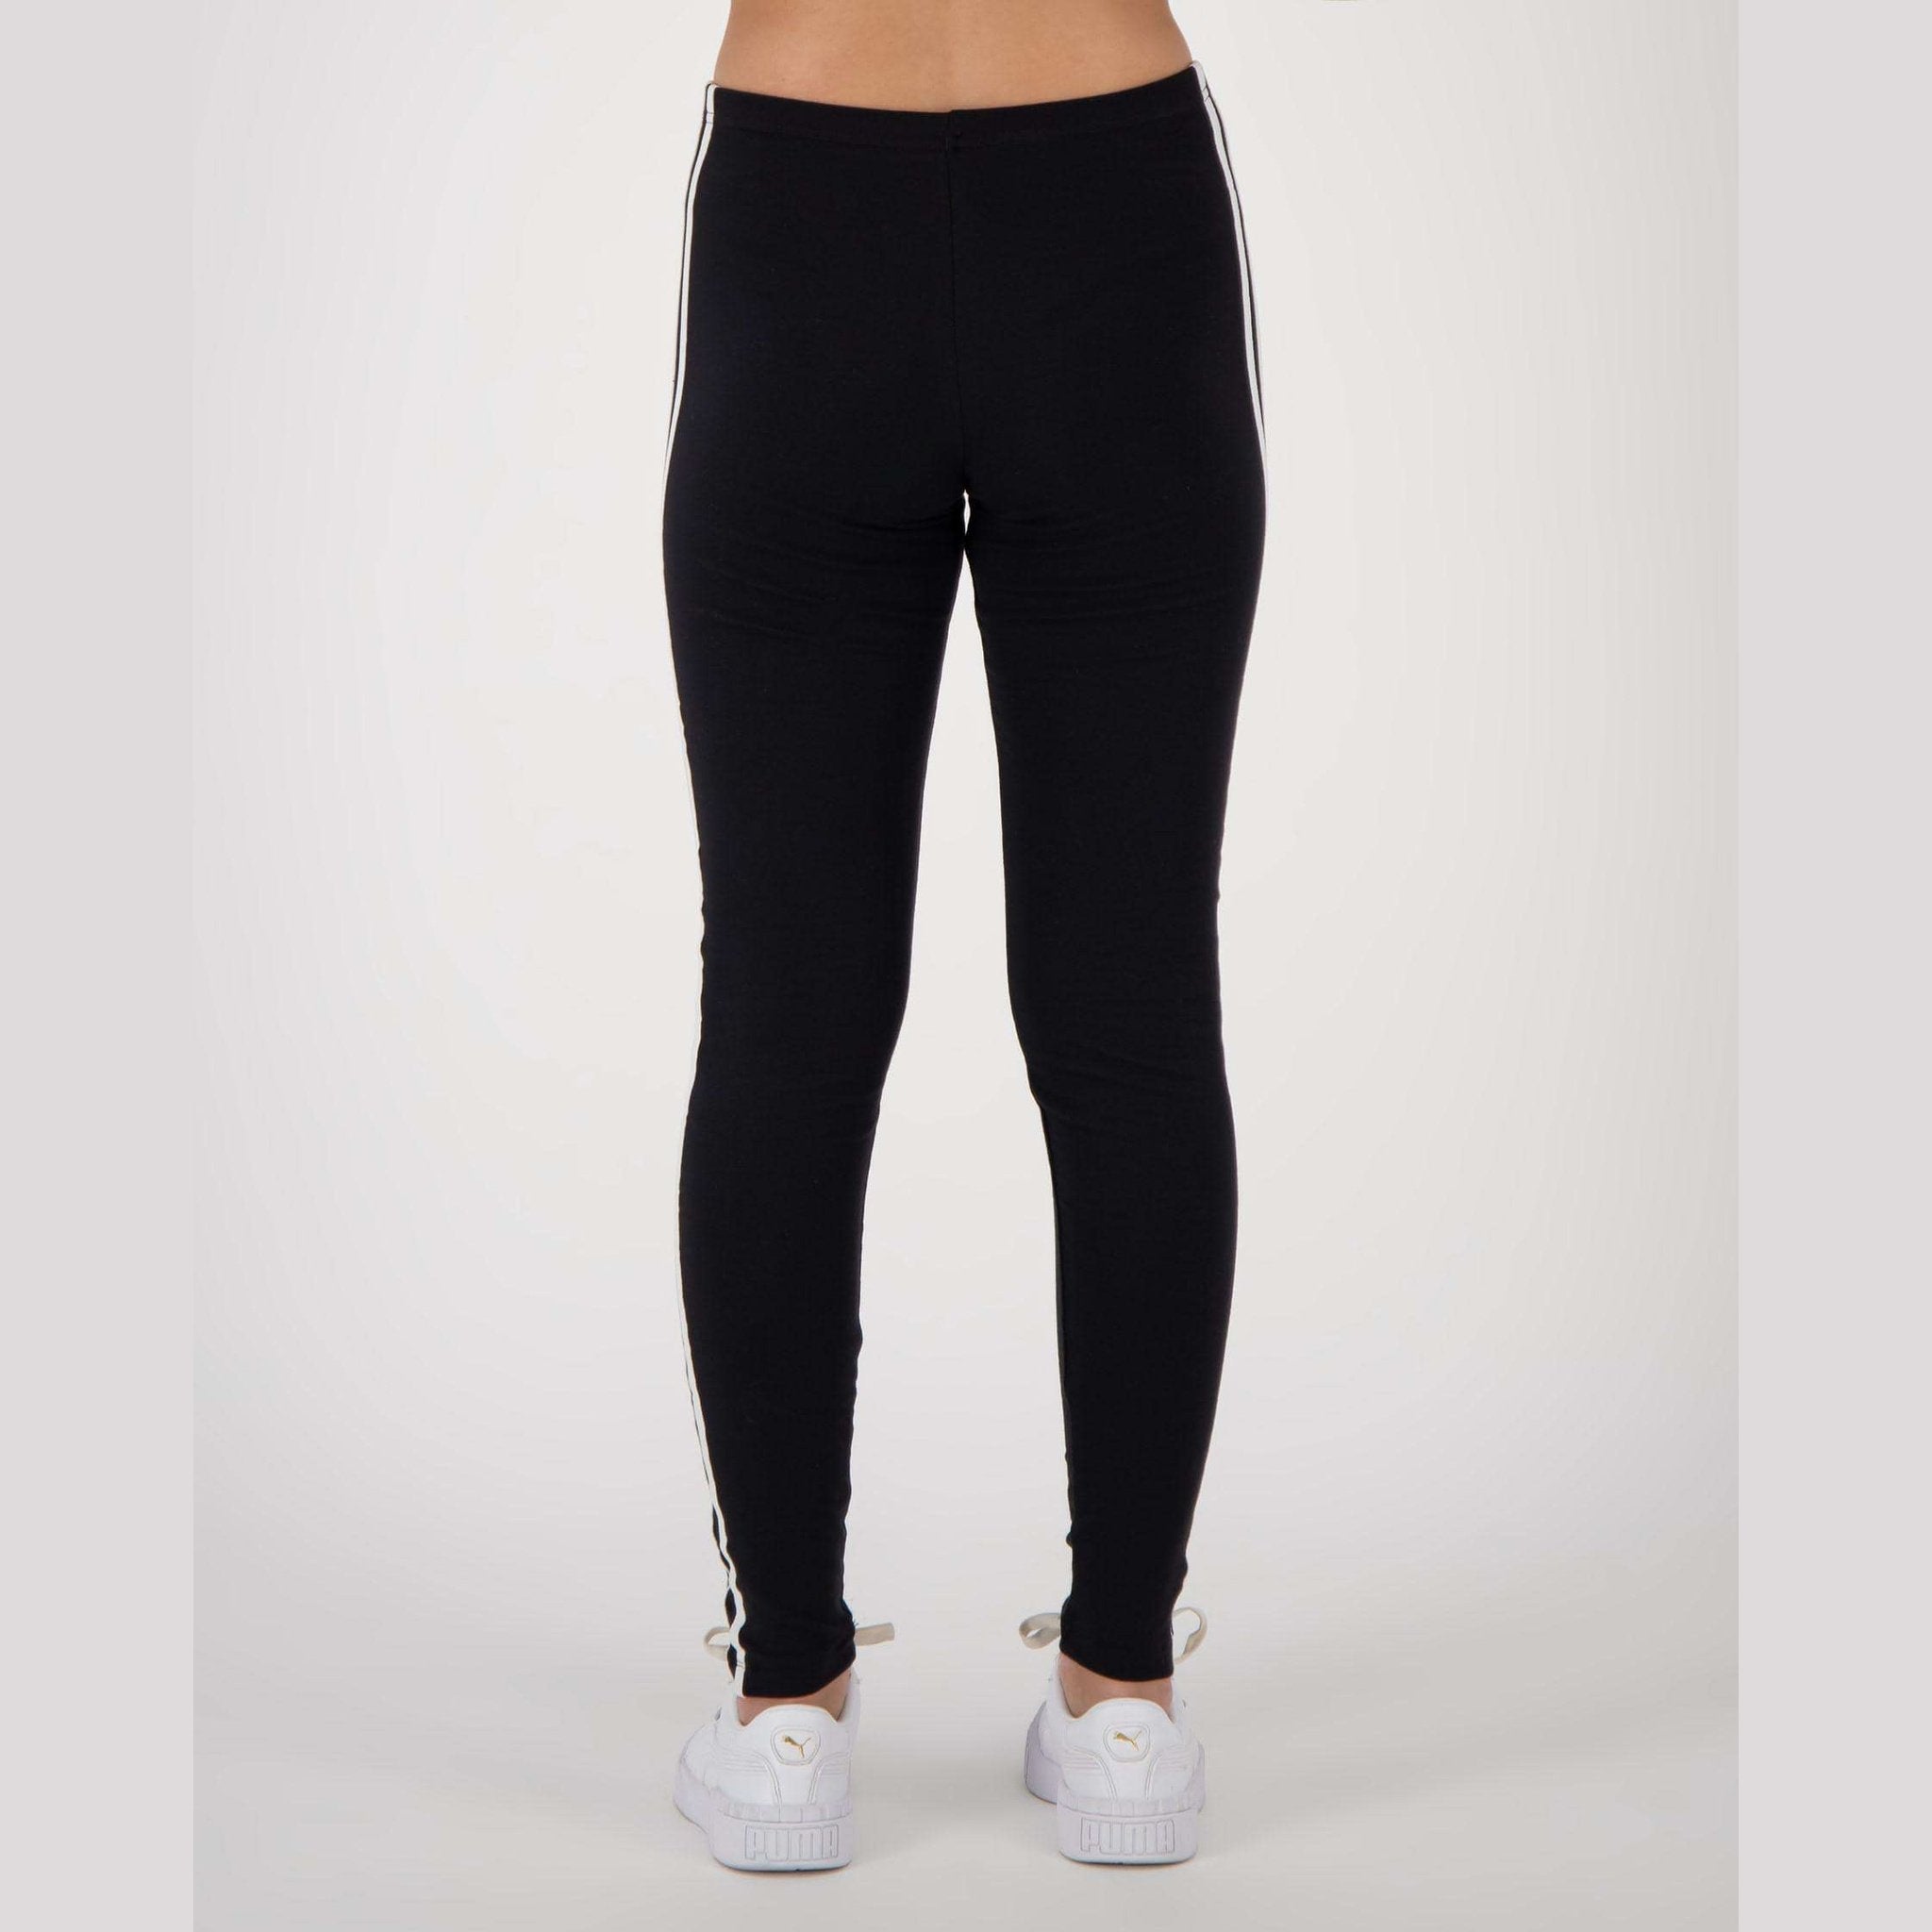 NEW ADIDAS GIRLS Age 13-14 Cotton Leggings Navy Blue sport gym casual £9.95  - PicClick UK